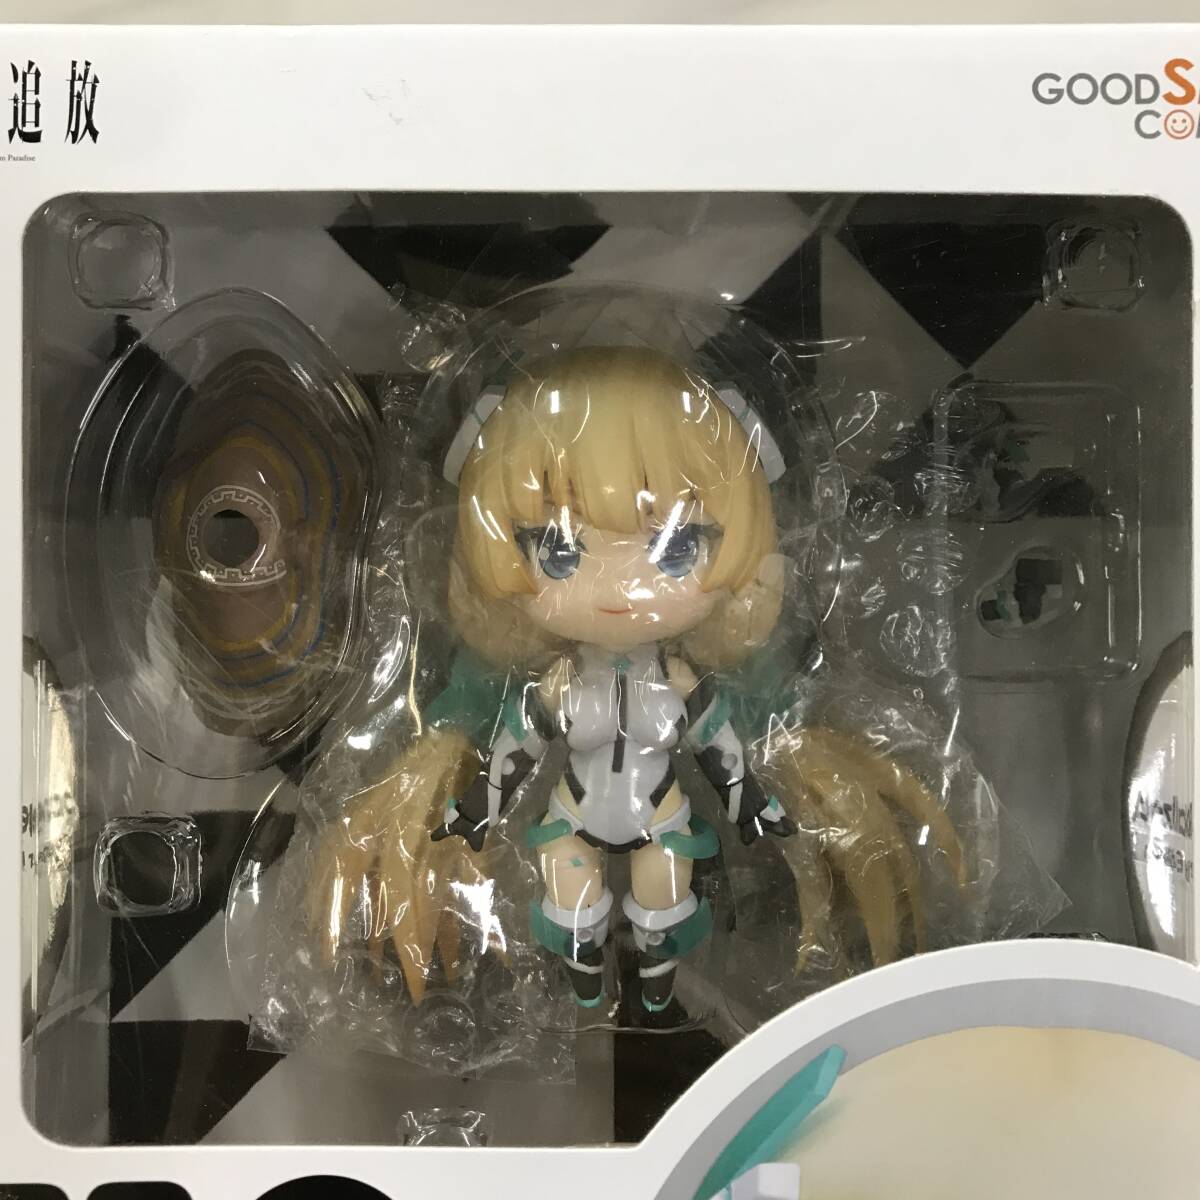 oy088 free shipping! unopened goods ......519 Anne jela* Balzac [ comfort ...-Expelled from Paradise-]